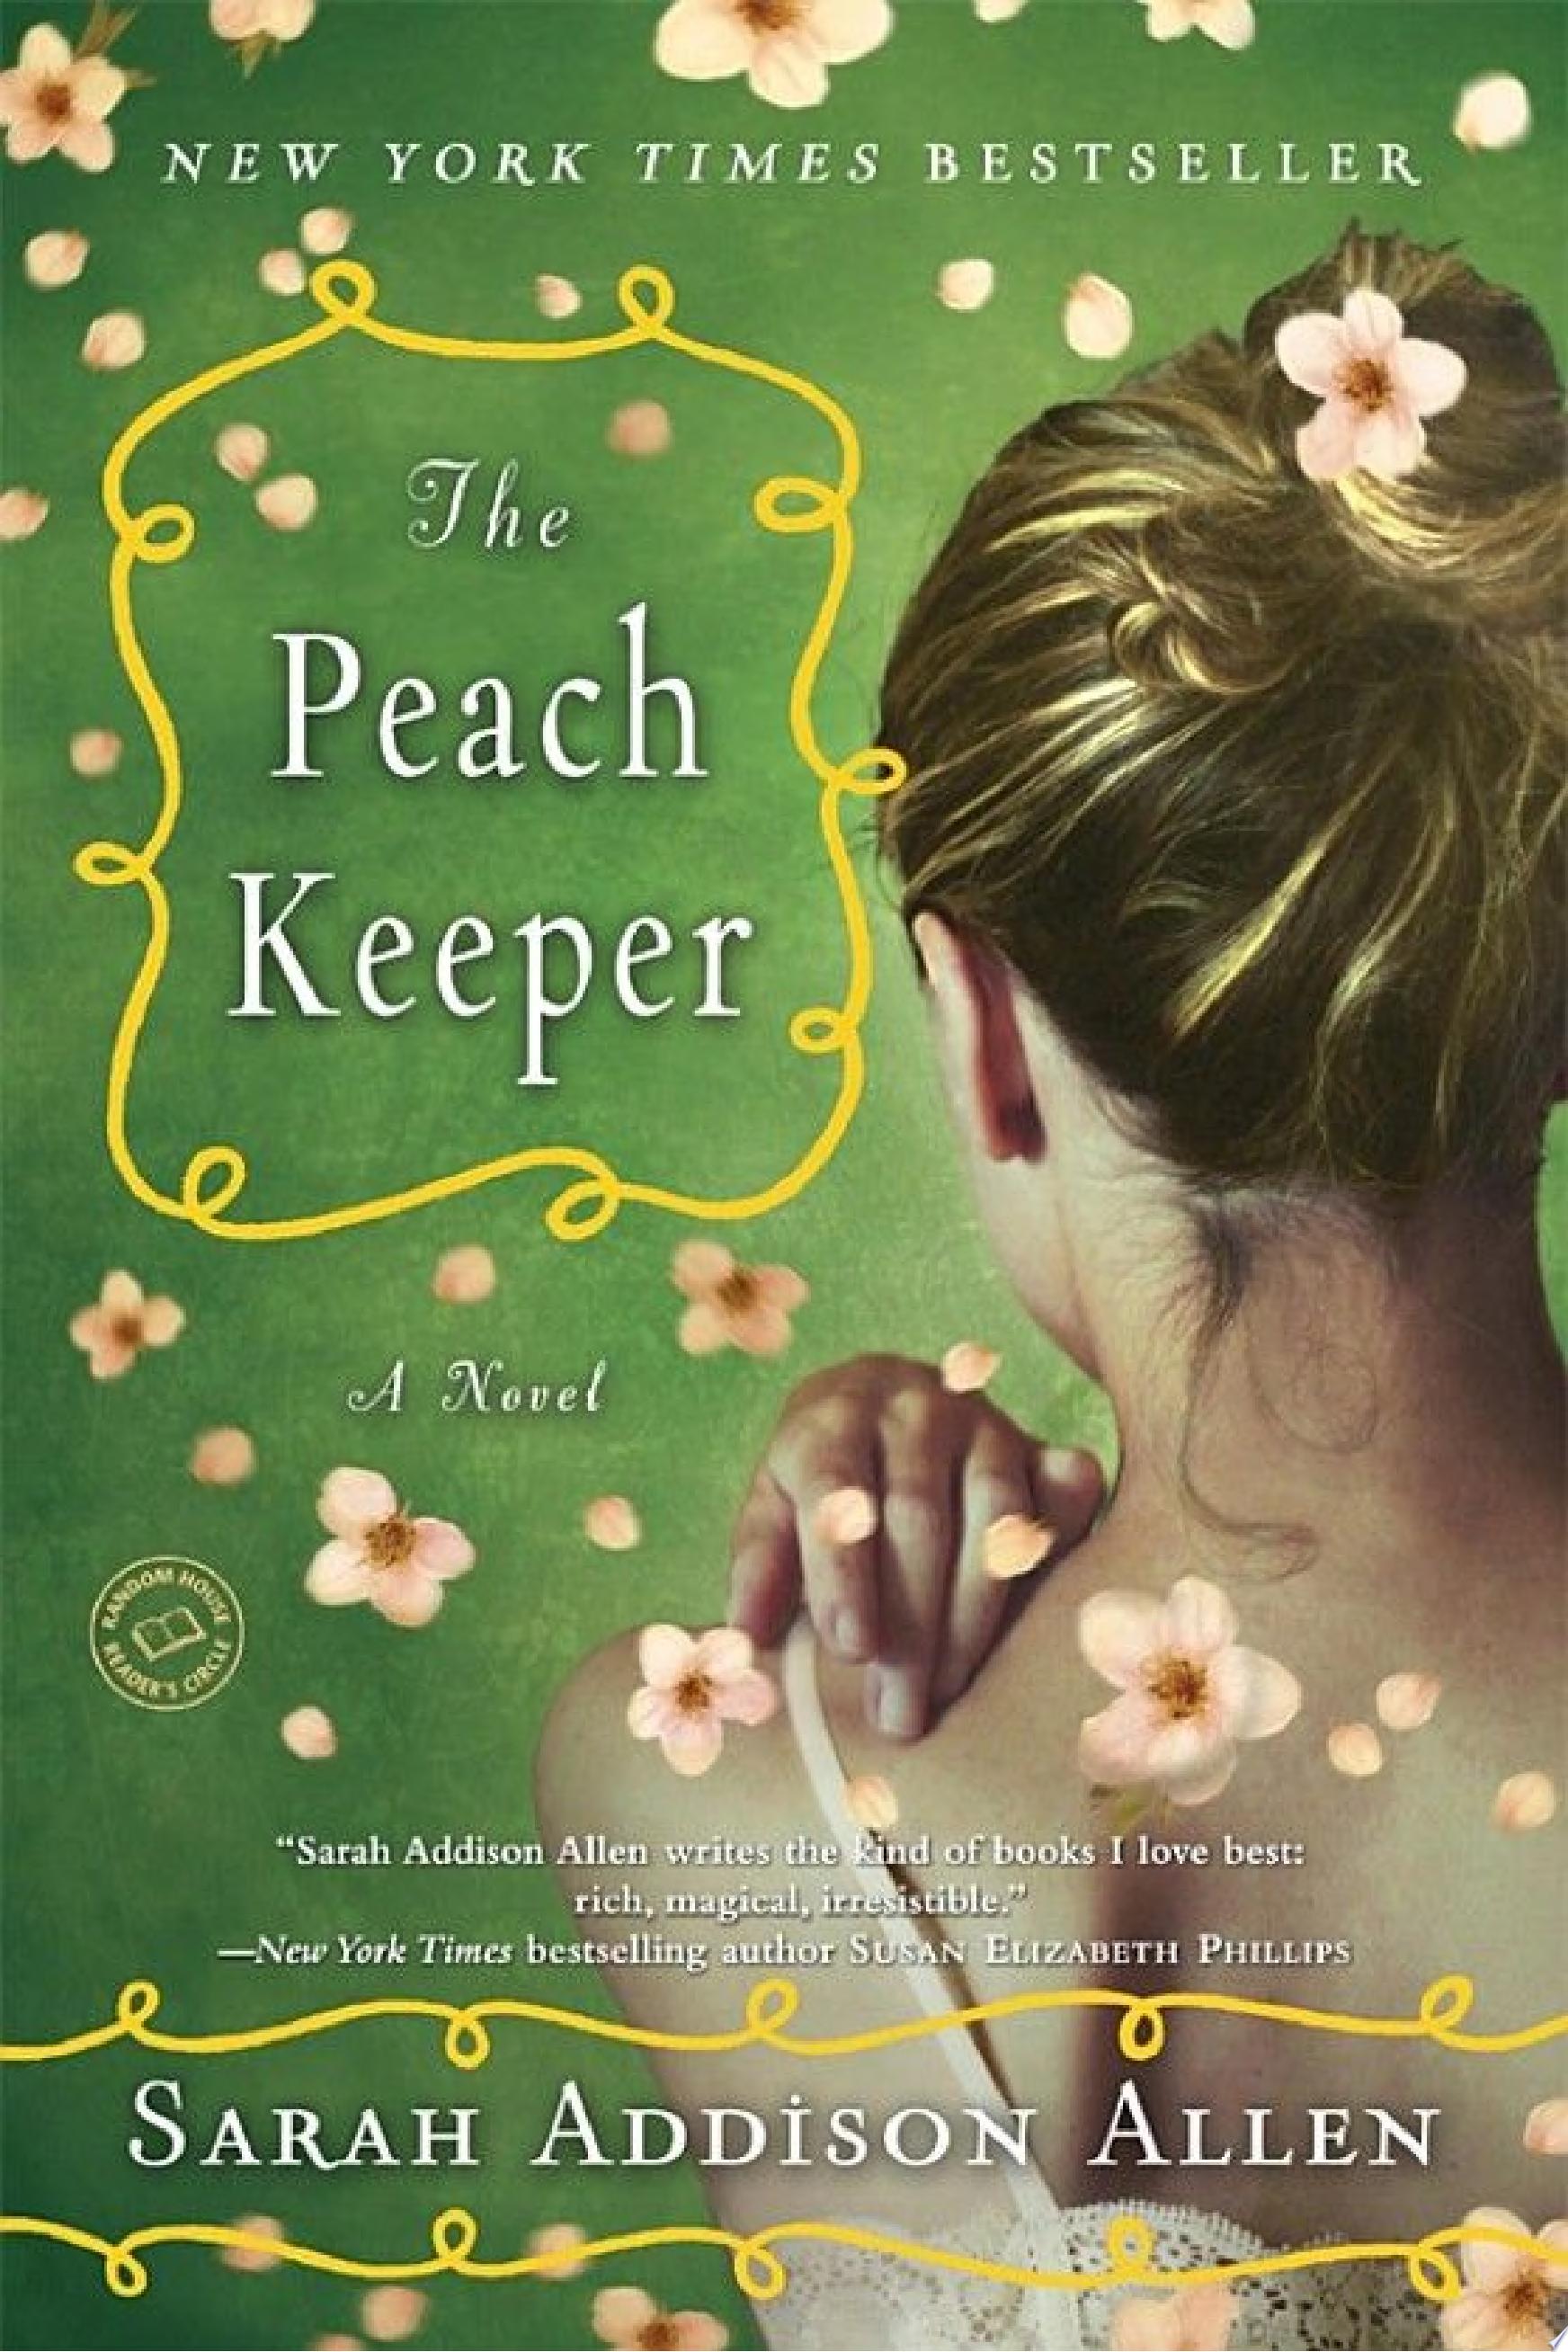 Image for "The Peach Keeper"